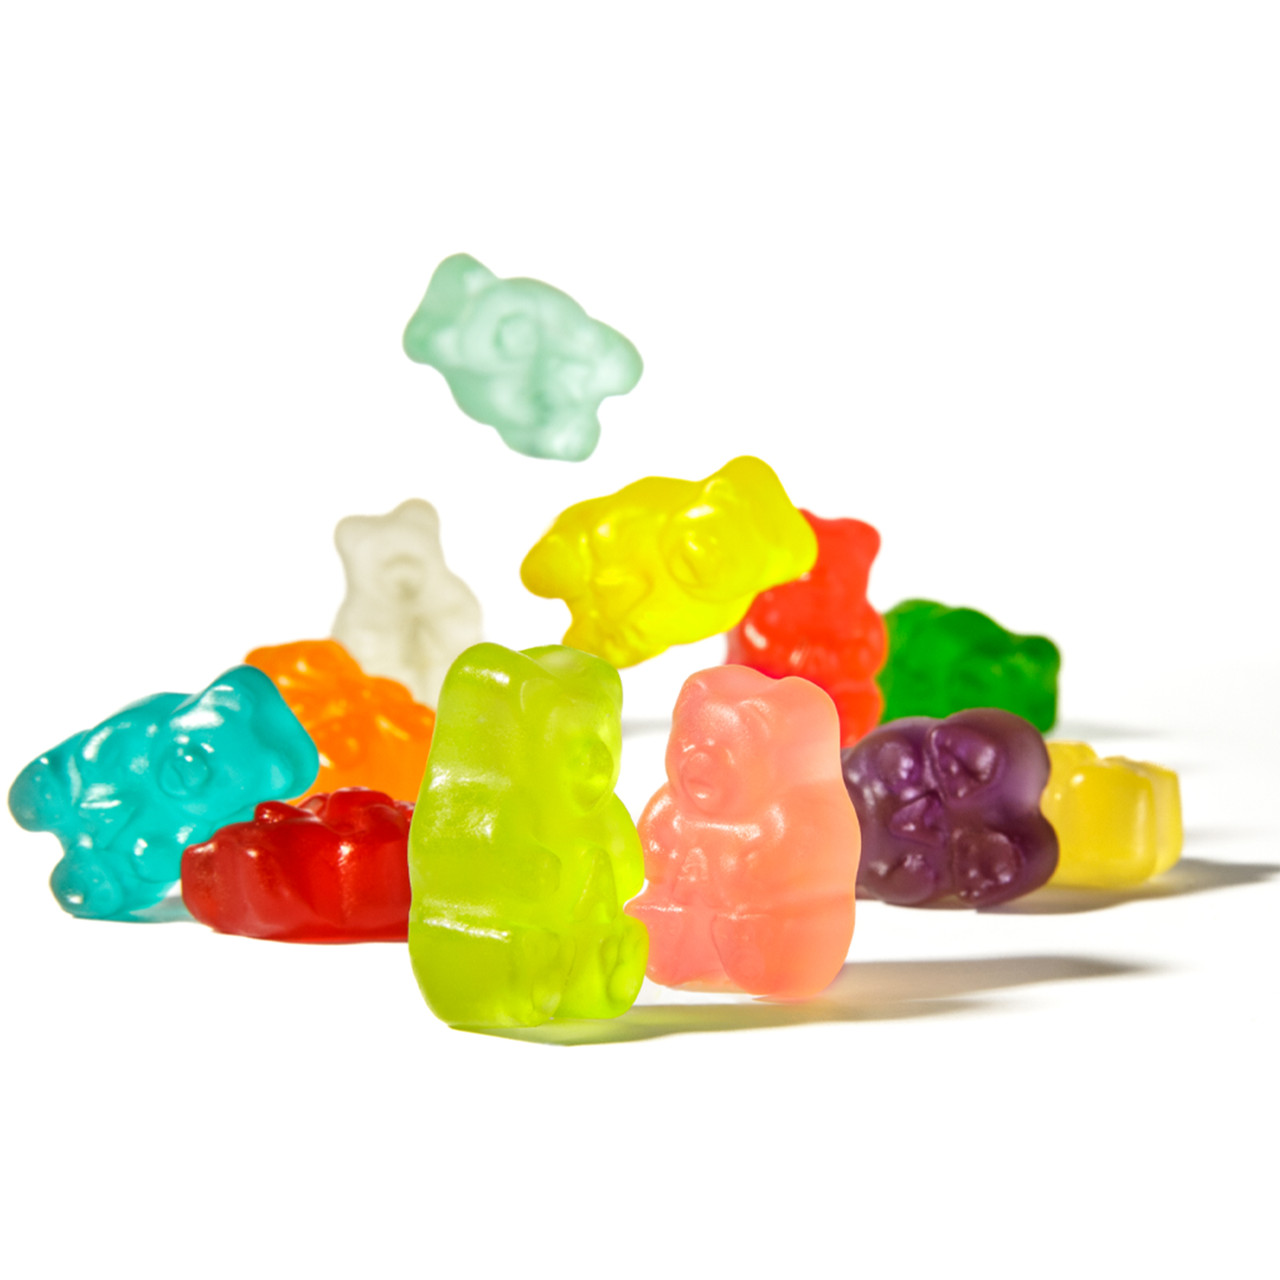 The 26-Pound Party Gummy Bear - Red Cherry